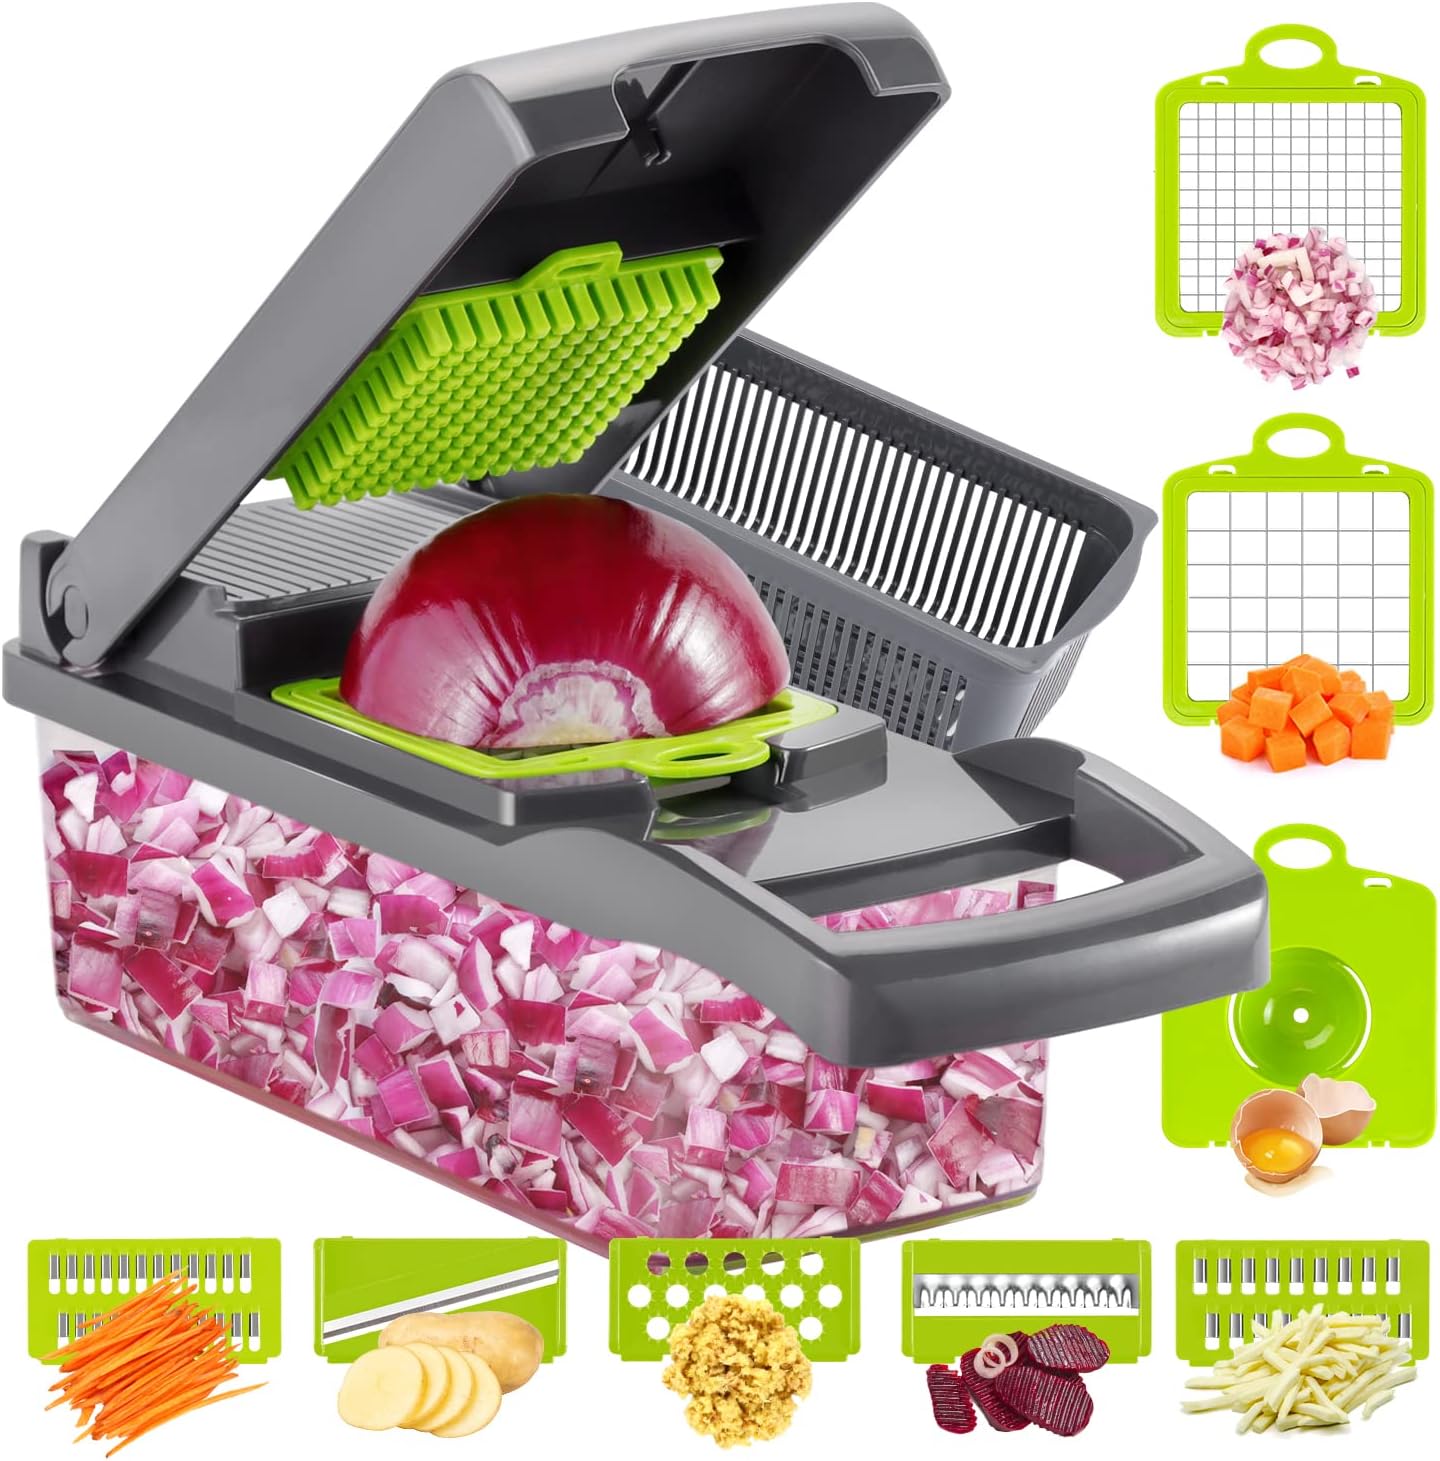 Save Big on Ourokhome Vegetable Chopper - 42% Off!